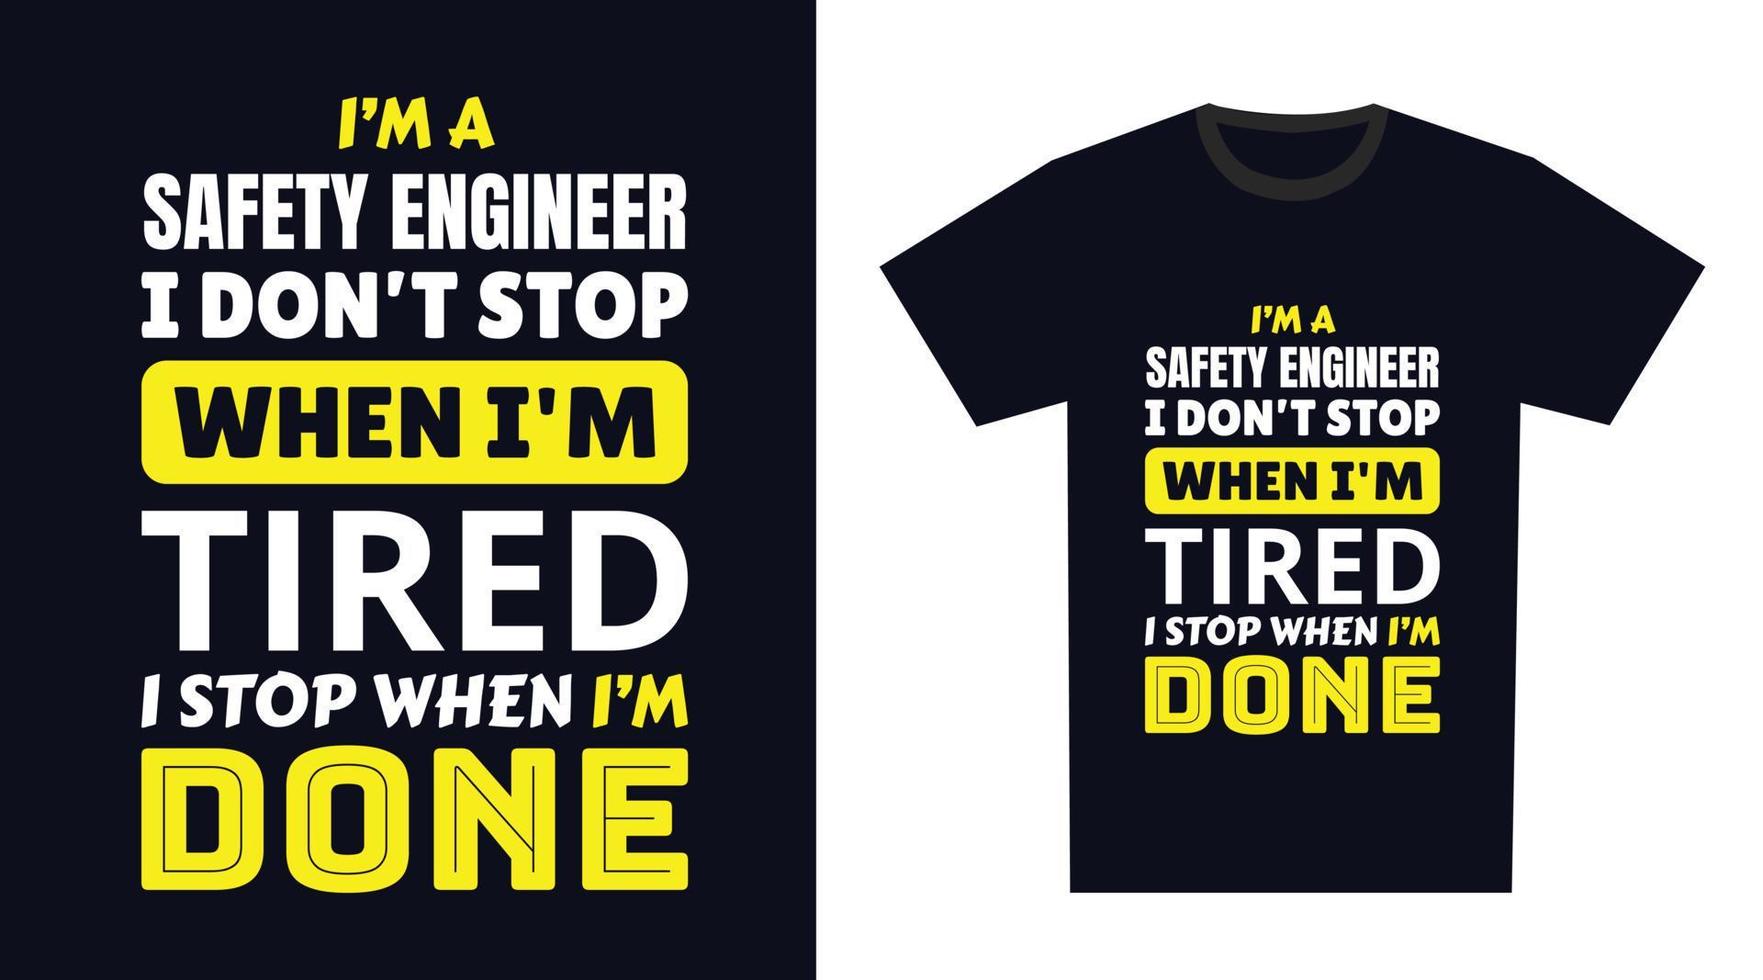 Safety Engineer T Shirt Design. I 'm a Safety Engineer I Don't Stop When I'm Tired, I Stop When I'm Done vector